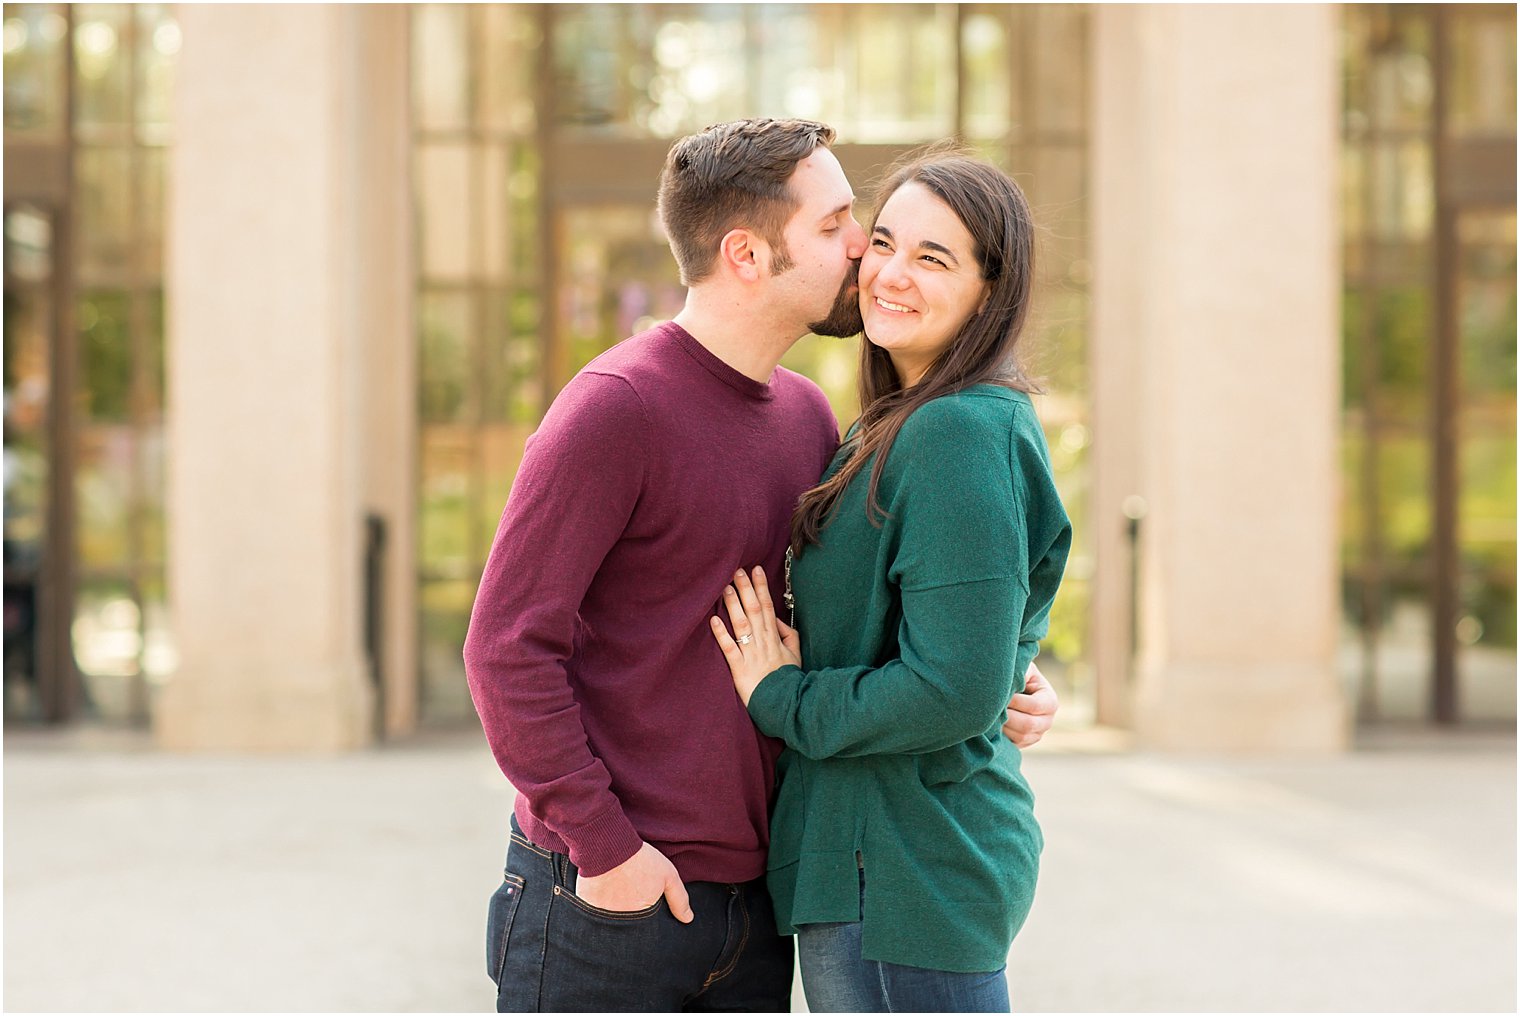 Authentic moment during engagement session | Photo by Idalia Photography